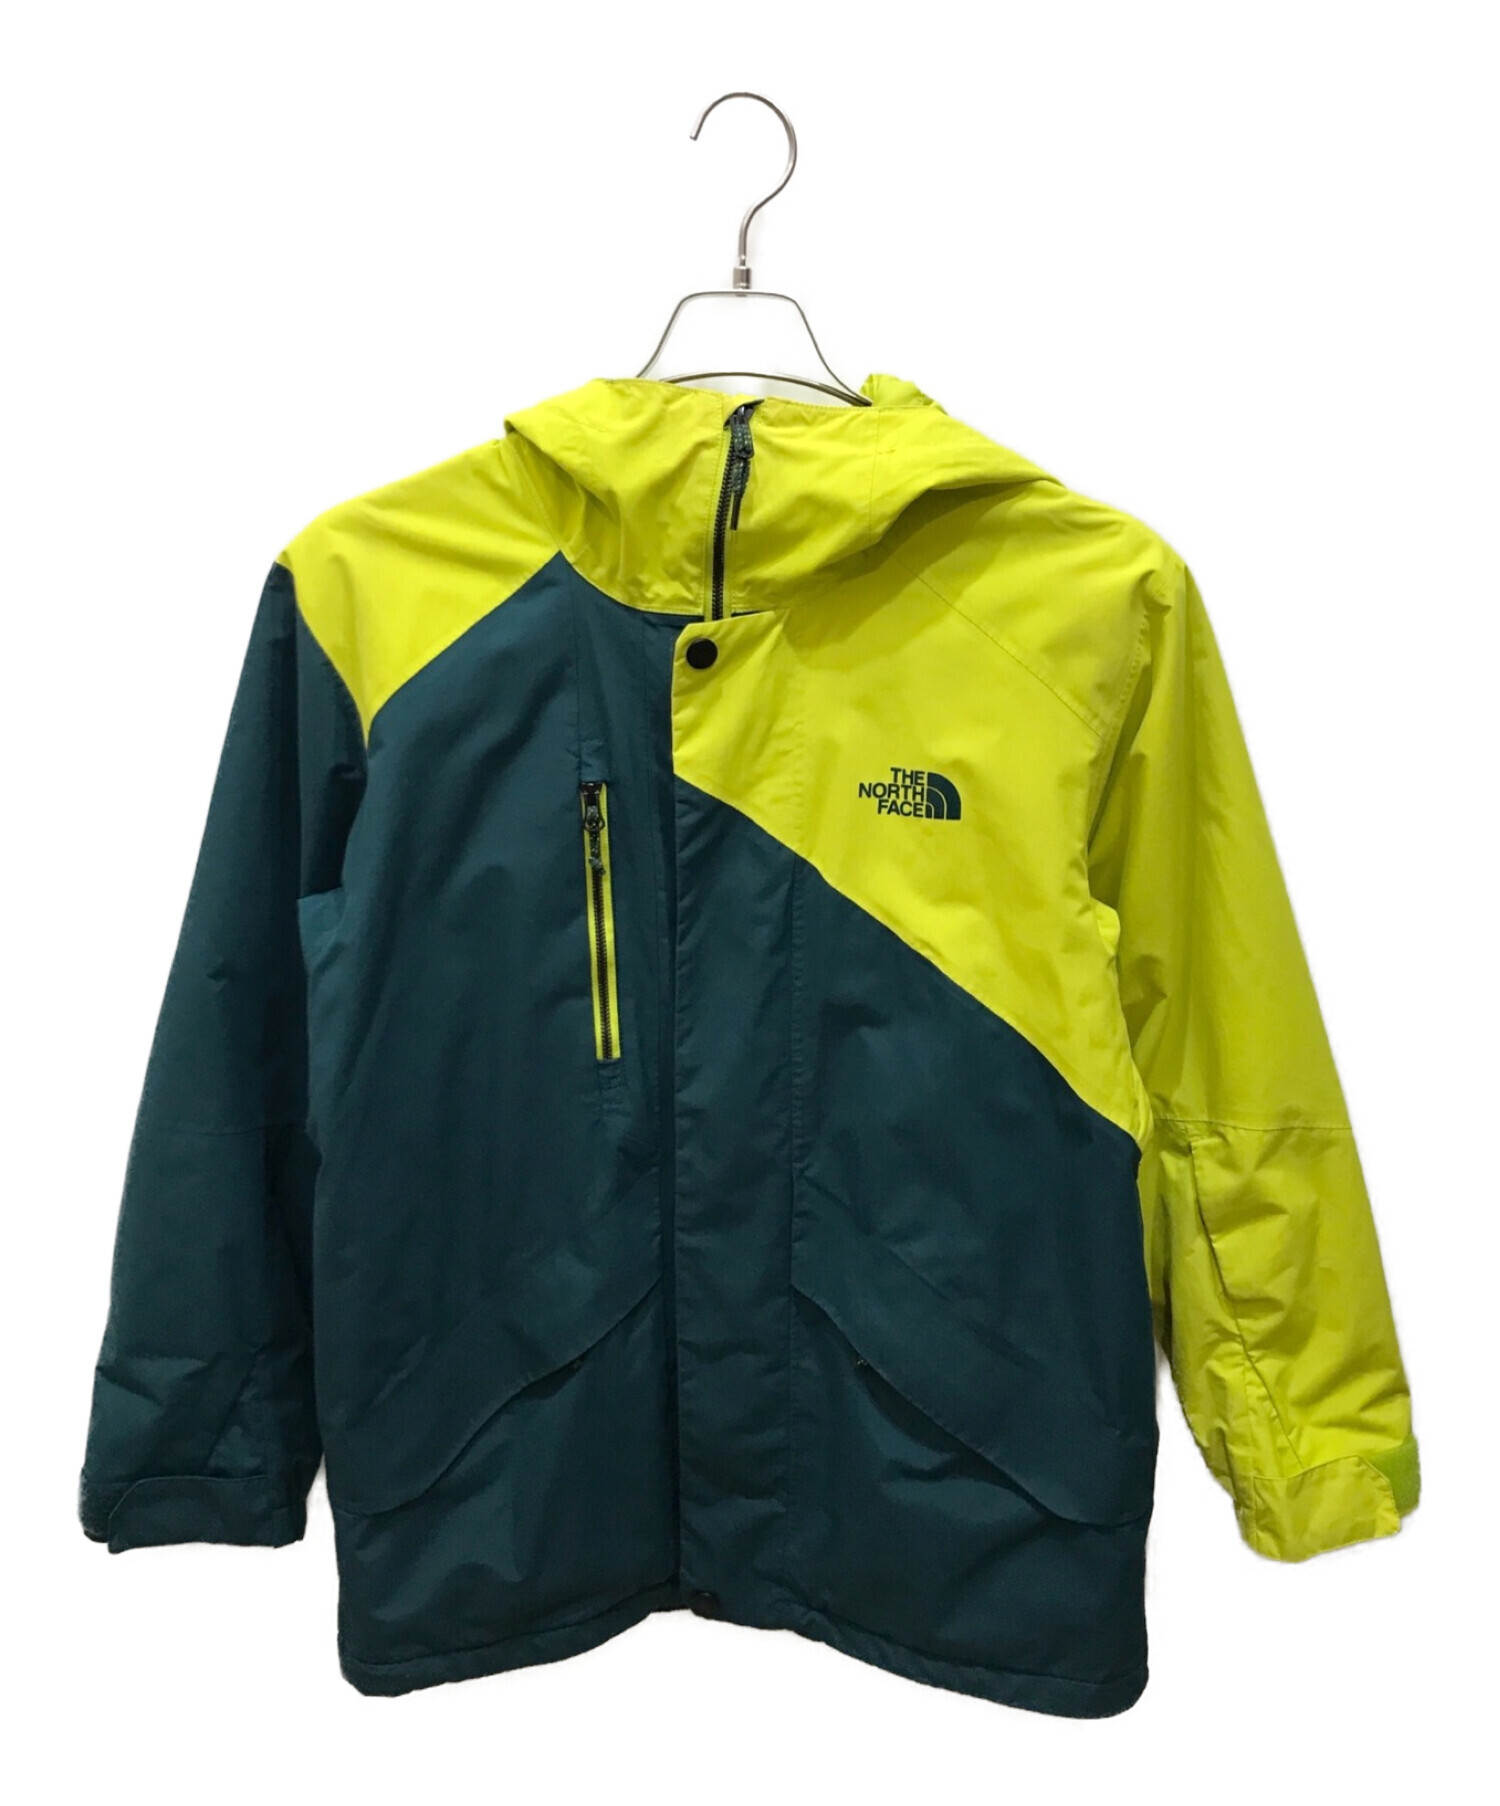 THE NORTH FACE ザ ノース フェイス DUBS INSULATED JACKET イエロー×グリーン サイズ:M